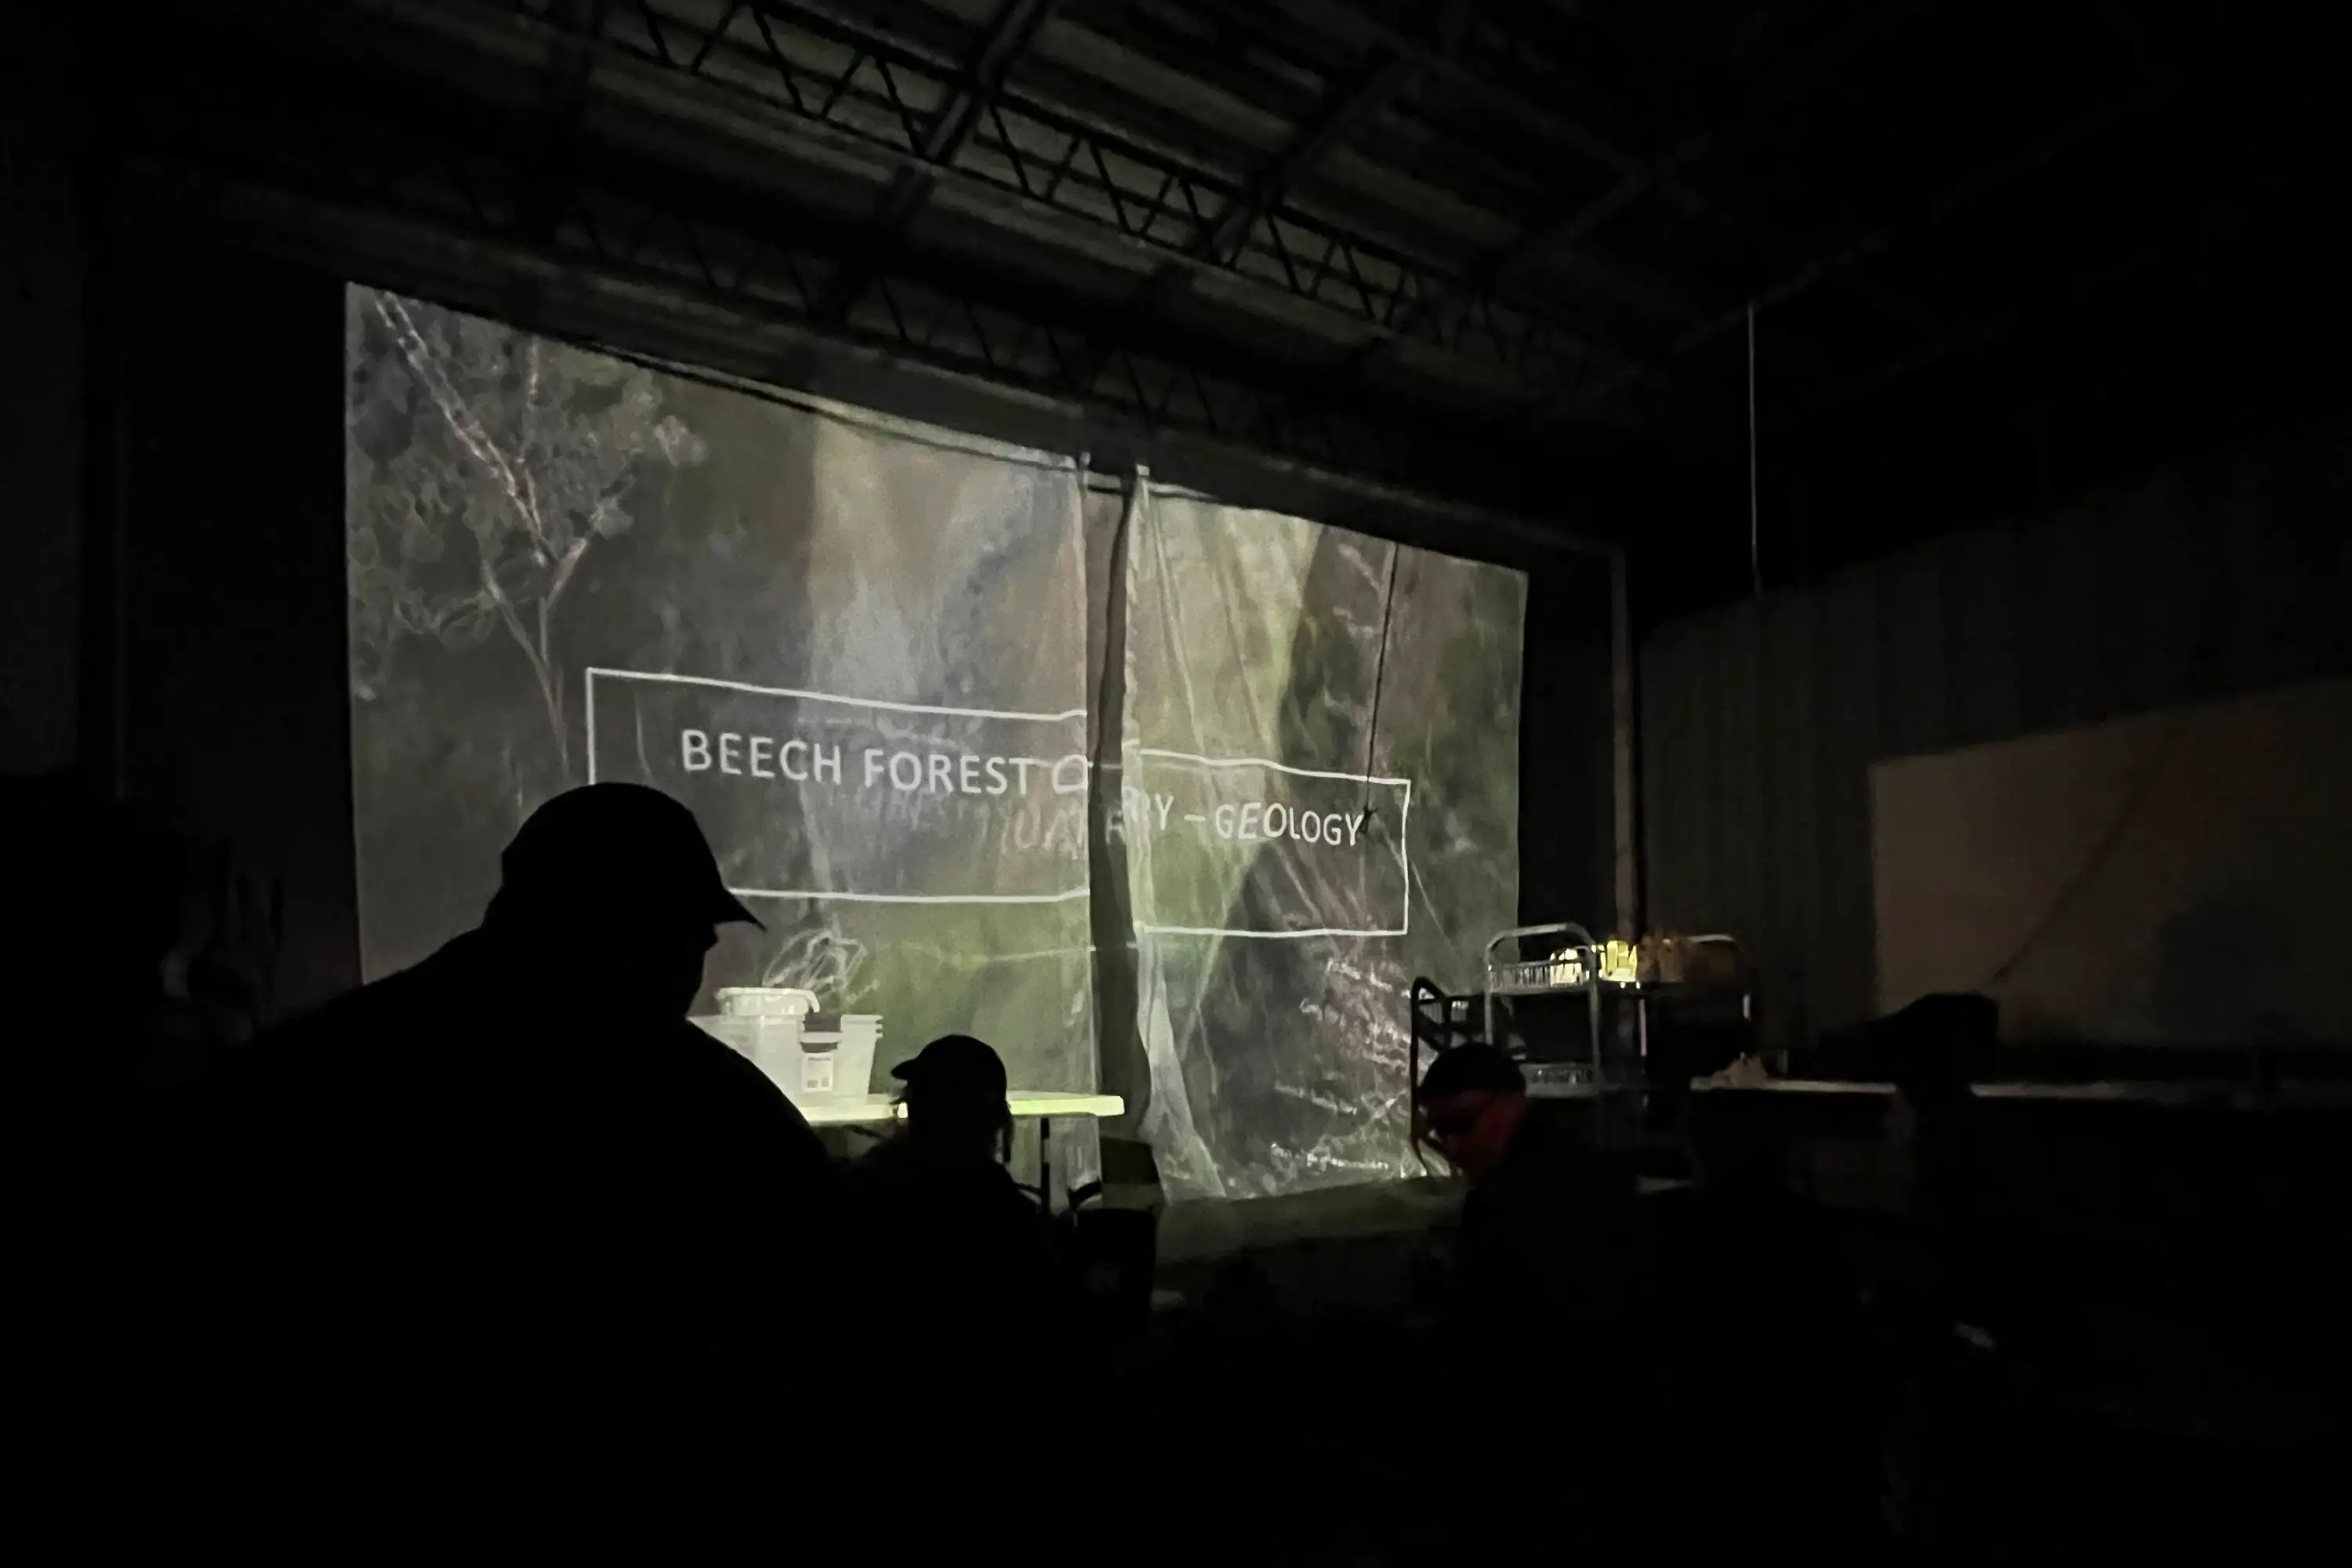 A presentation is projected onto partially transparent sheets with text that reads 'Beech Forest Quarry — Geology'.